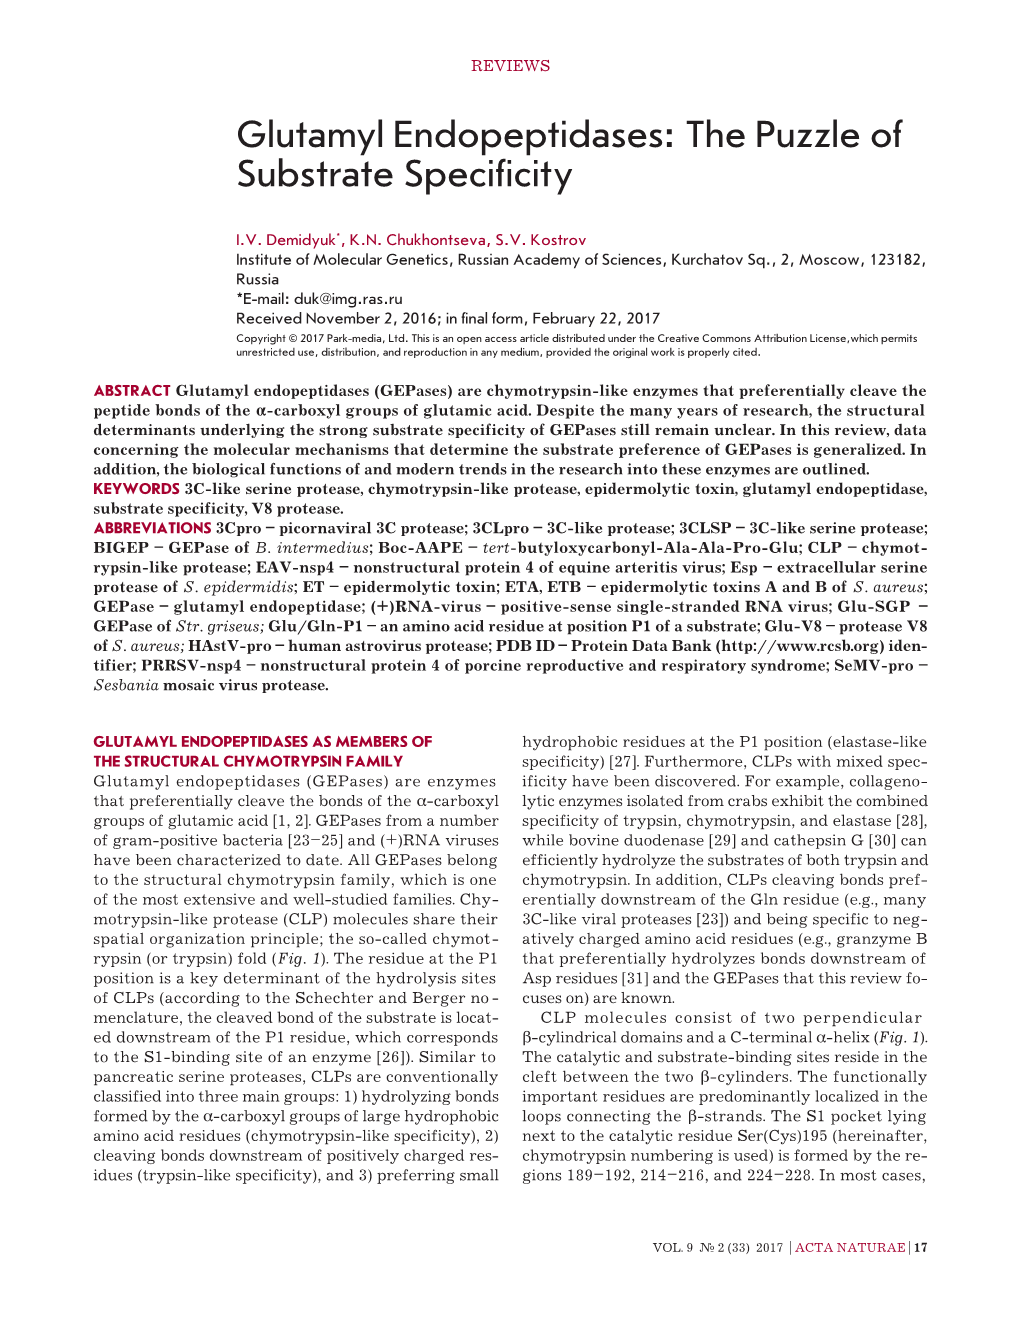 Glutamyl Endopeptidases: the Puzzle of Substrate Specificity